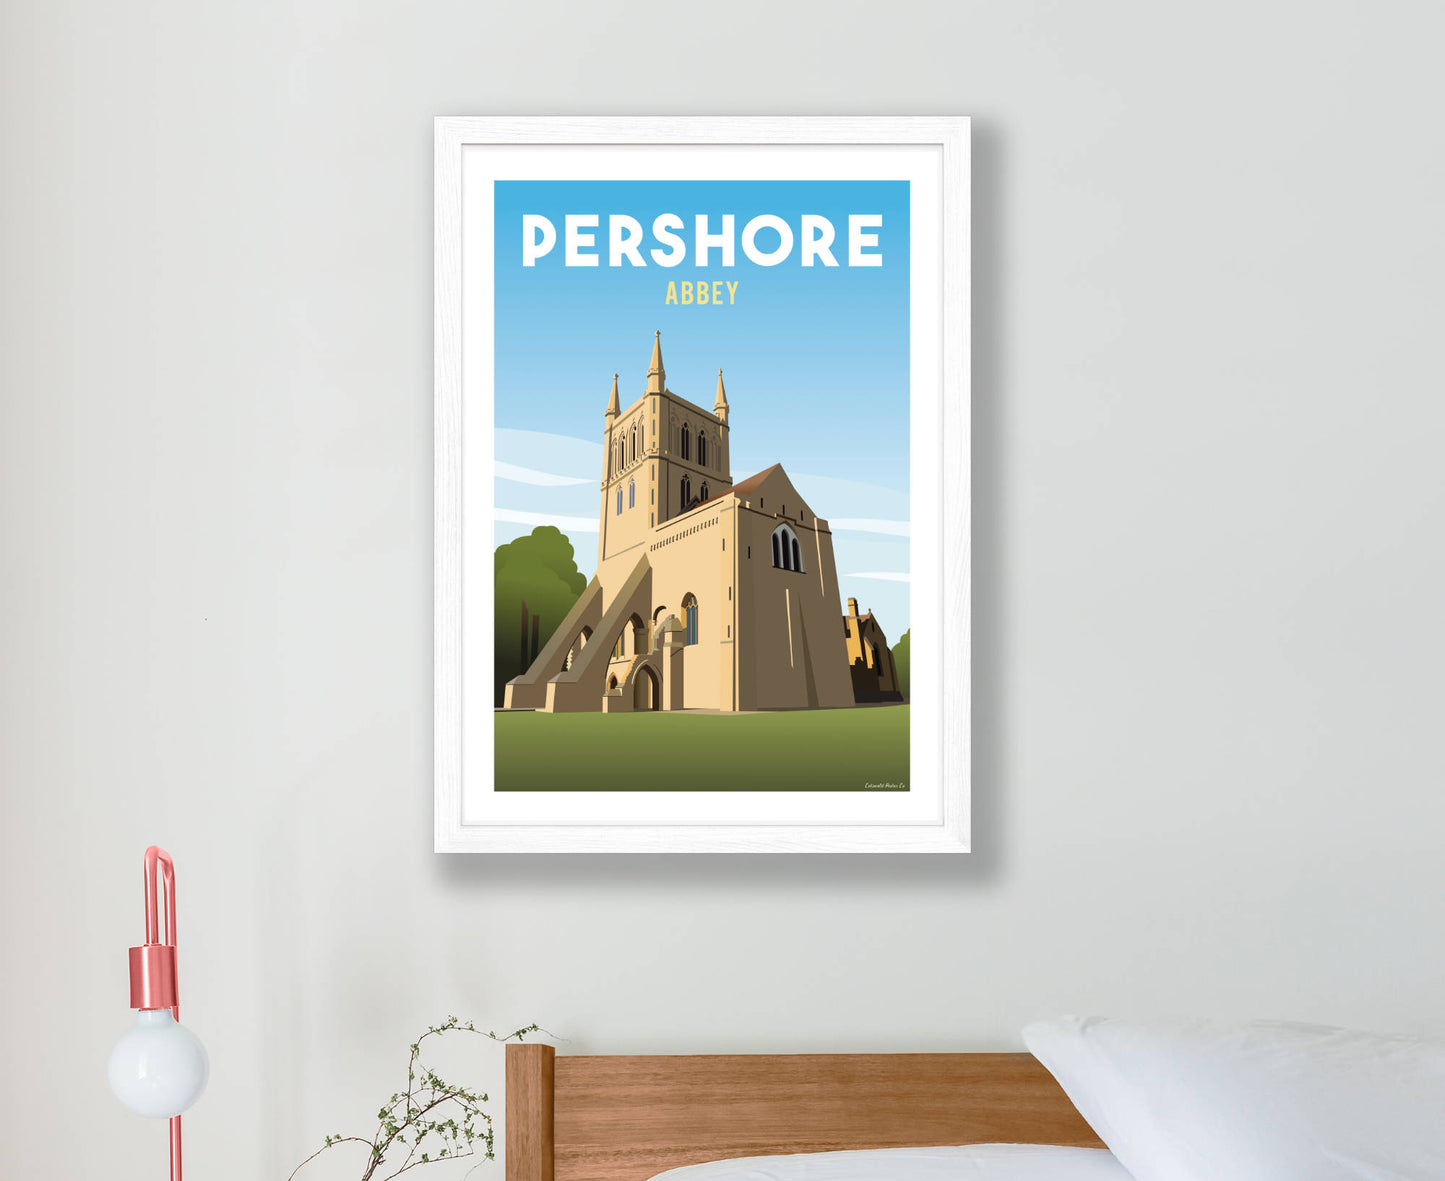 Pershore Abbey Poster in white frame